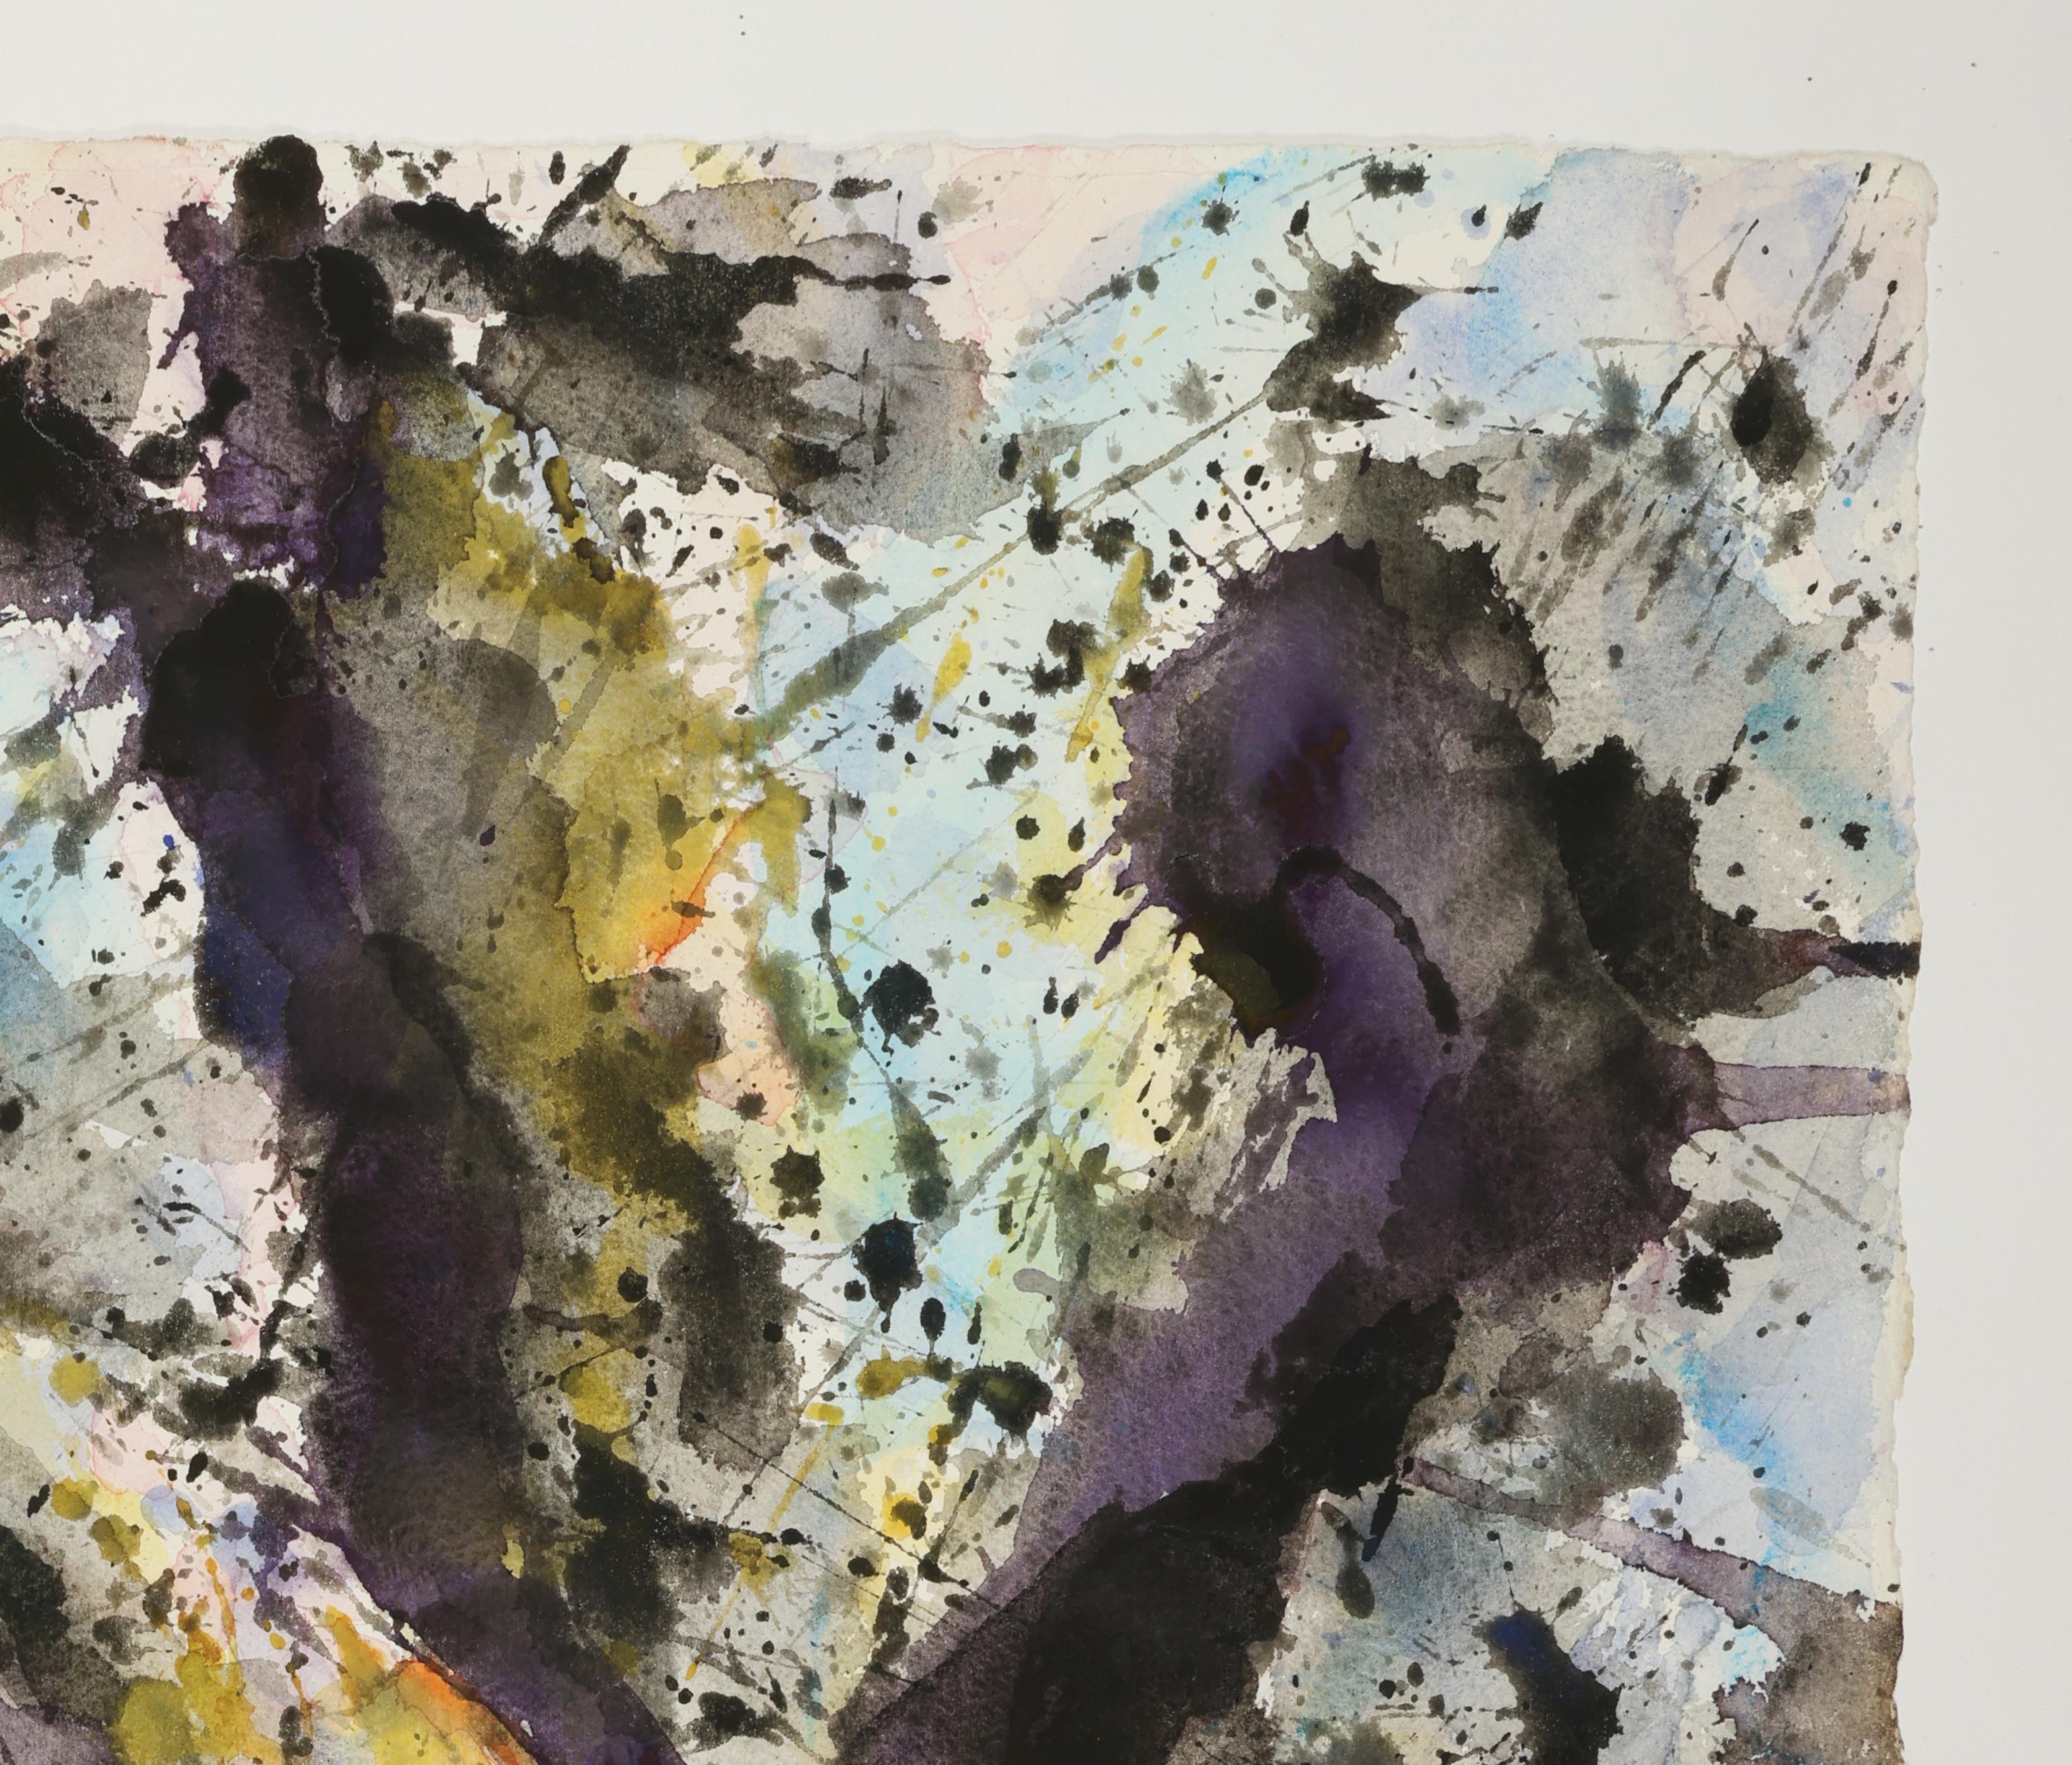 Abstract Watercolor Painting, 'Design for Space', C. 1998 by David Ruth For Sale 3